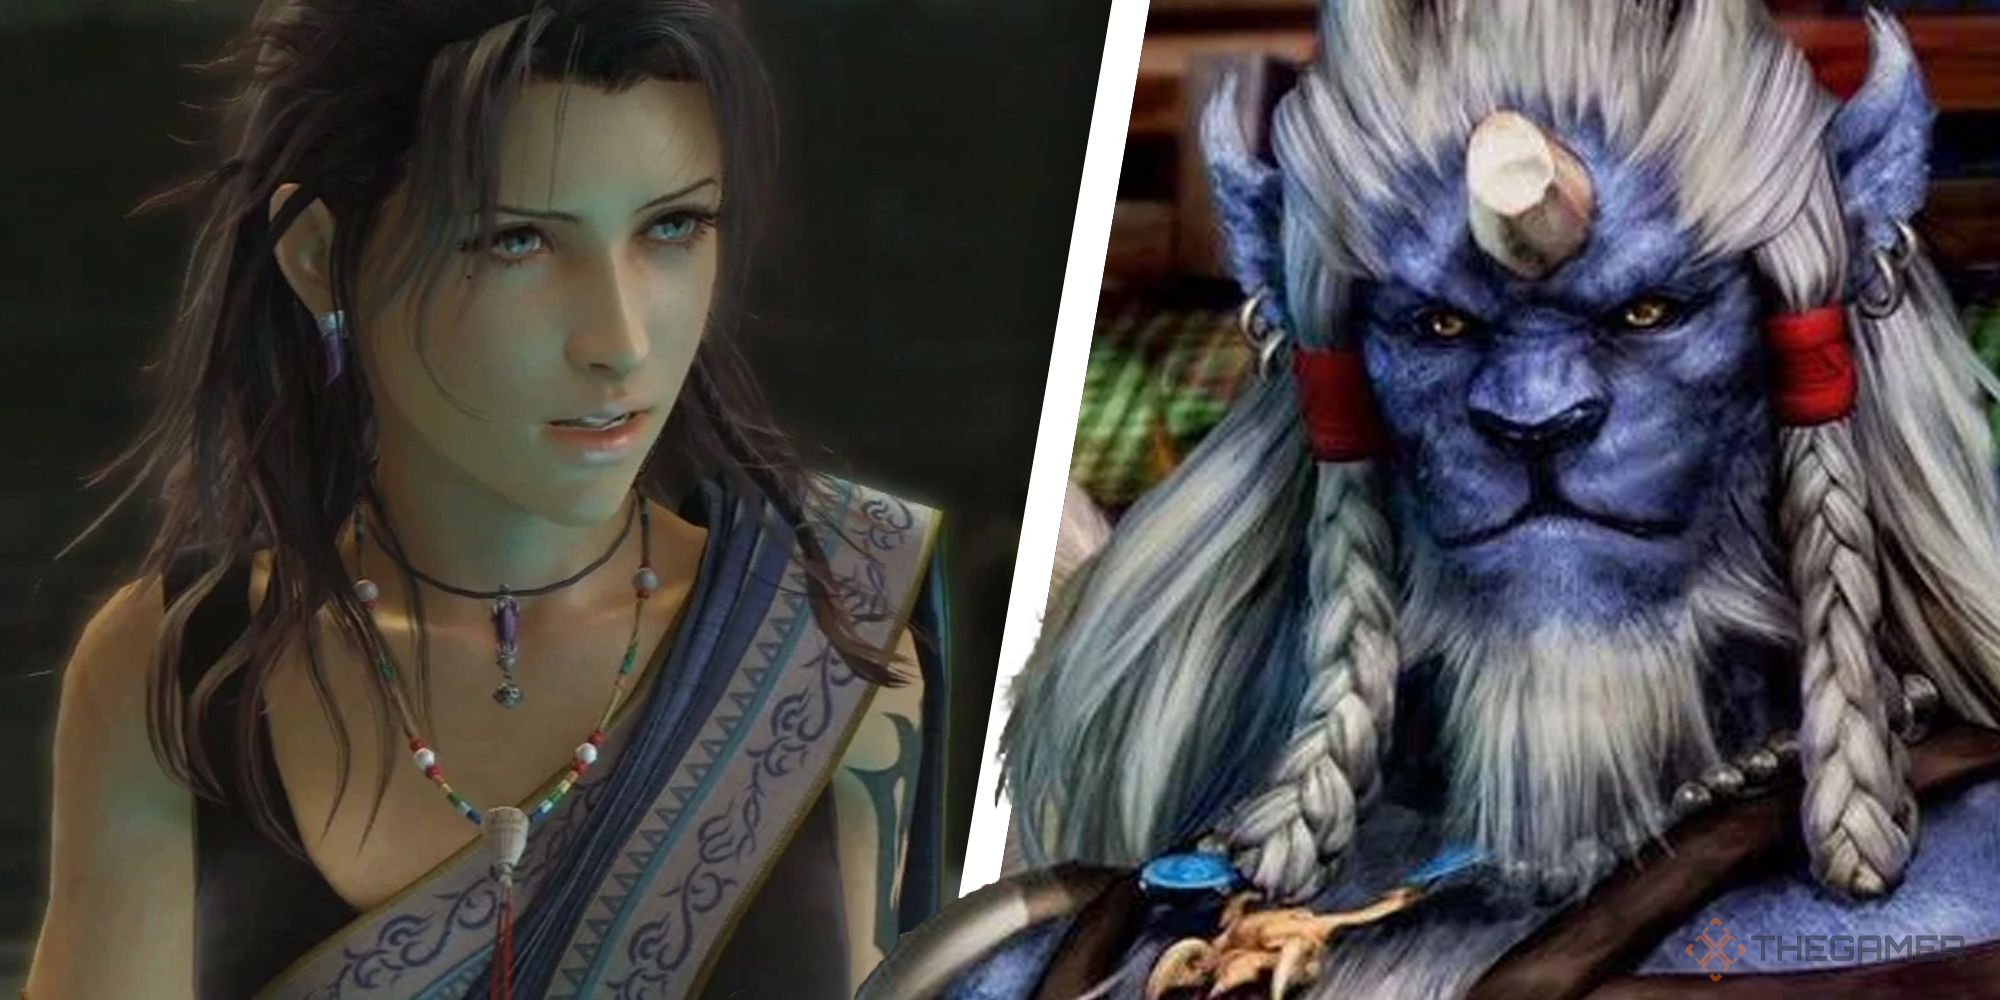 Ranking the Cast of Final Fantasy X